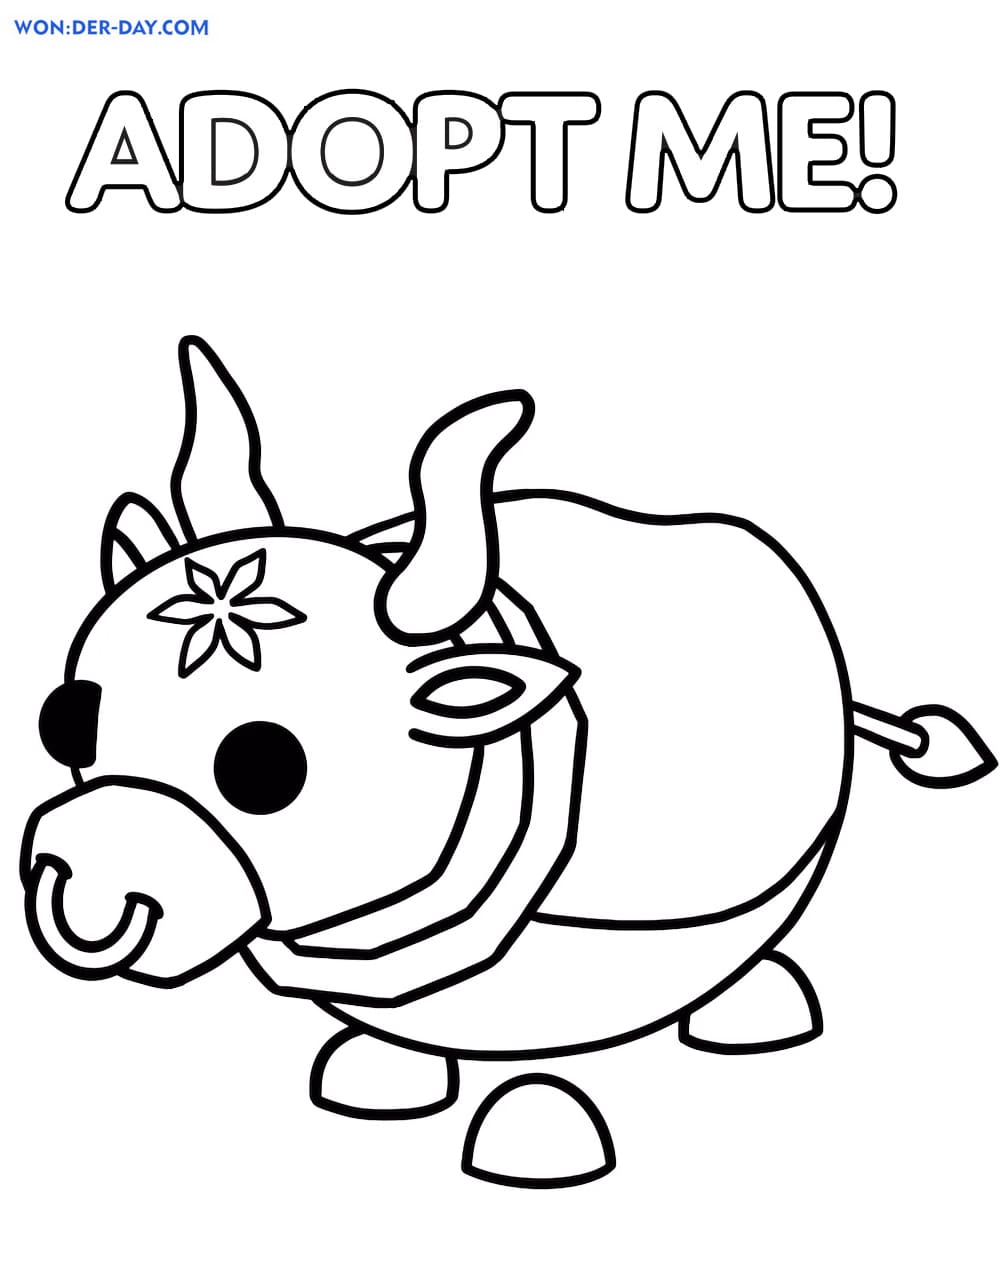 43 adopt me halloween pets coloring pages Free Printable Templates